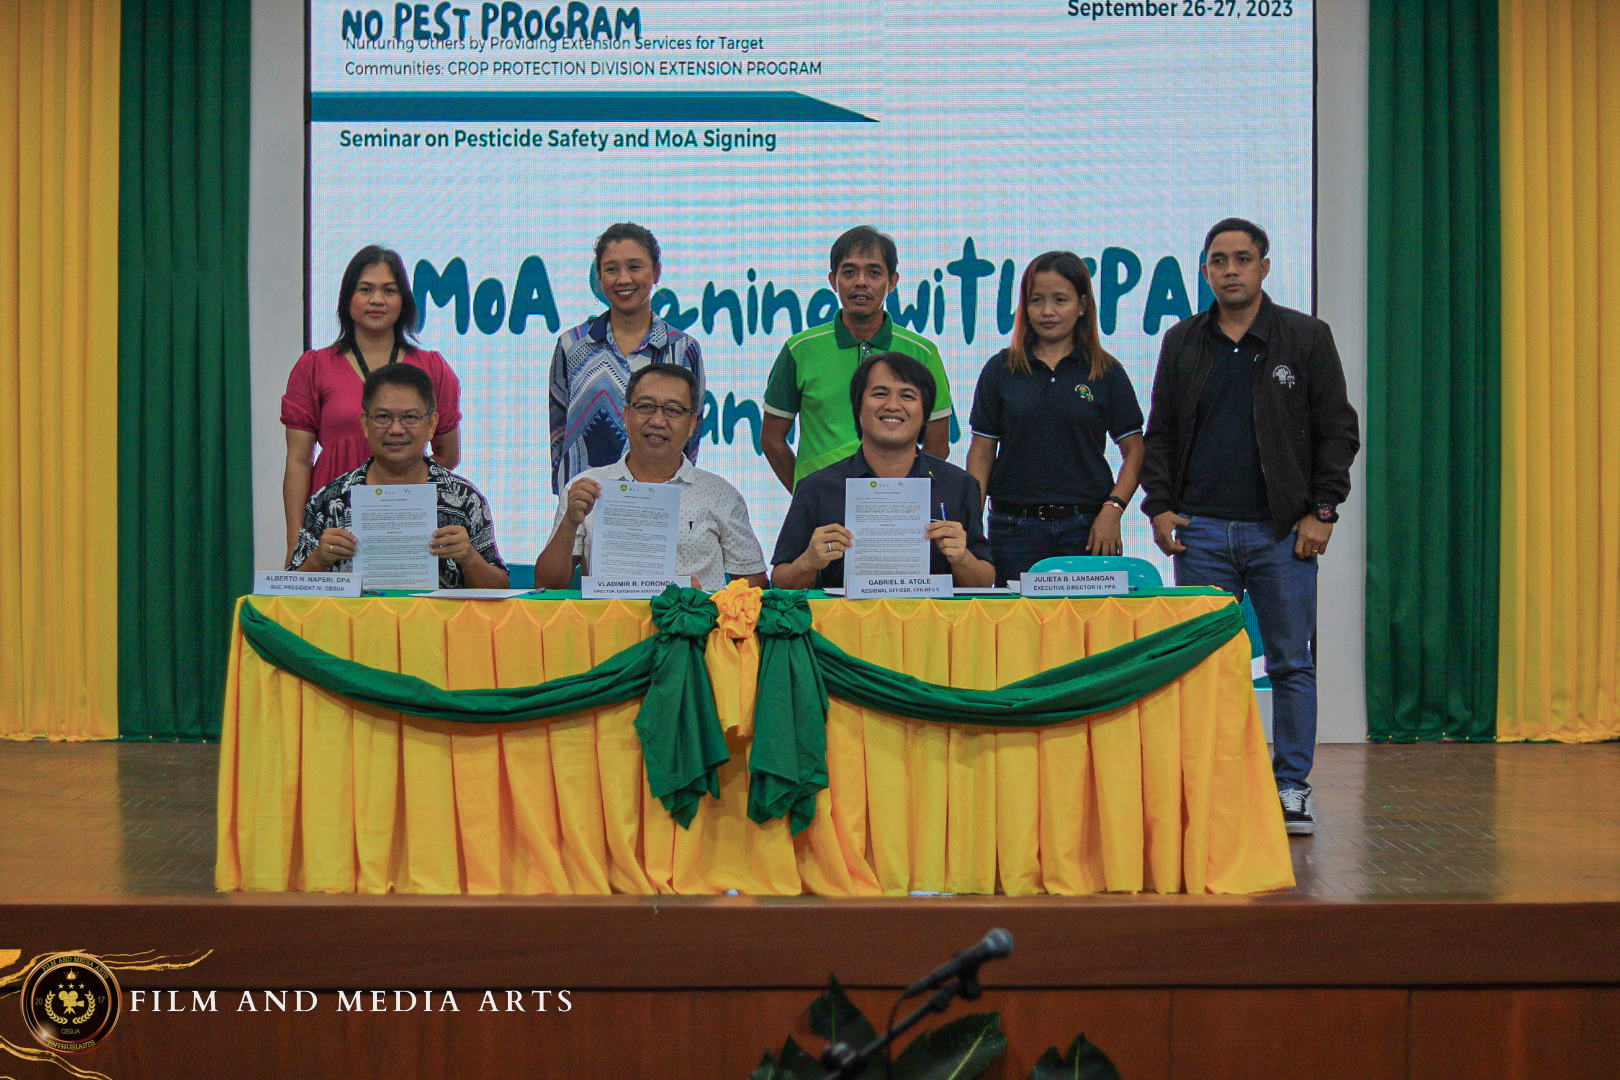 CANR, ESD HOSTS SEMINAR ON PESTICIDE SAFETY AND MOA SIGNING WITH CROP PROTECTION ASSOCIATION OF THE PHILIPPINES Inc. (CPAP) AND FERTILIZERS AND PESTICIDES AUTHORITY (FPA)